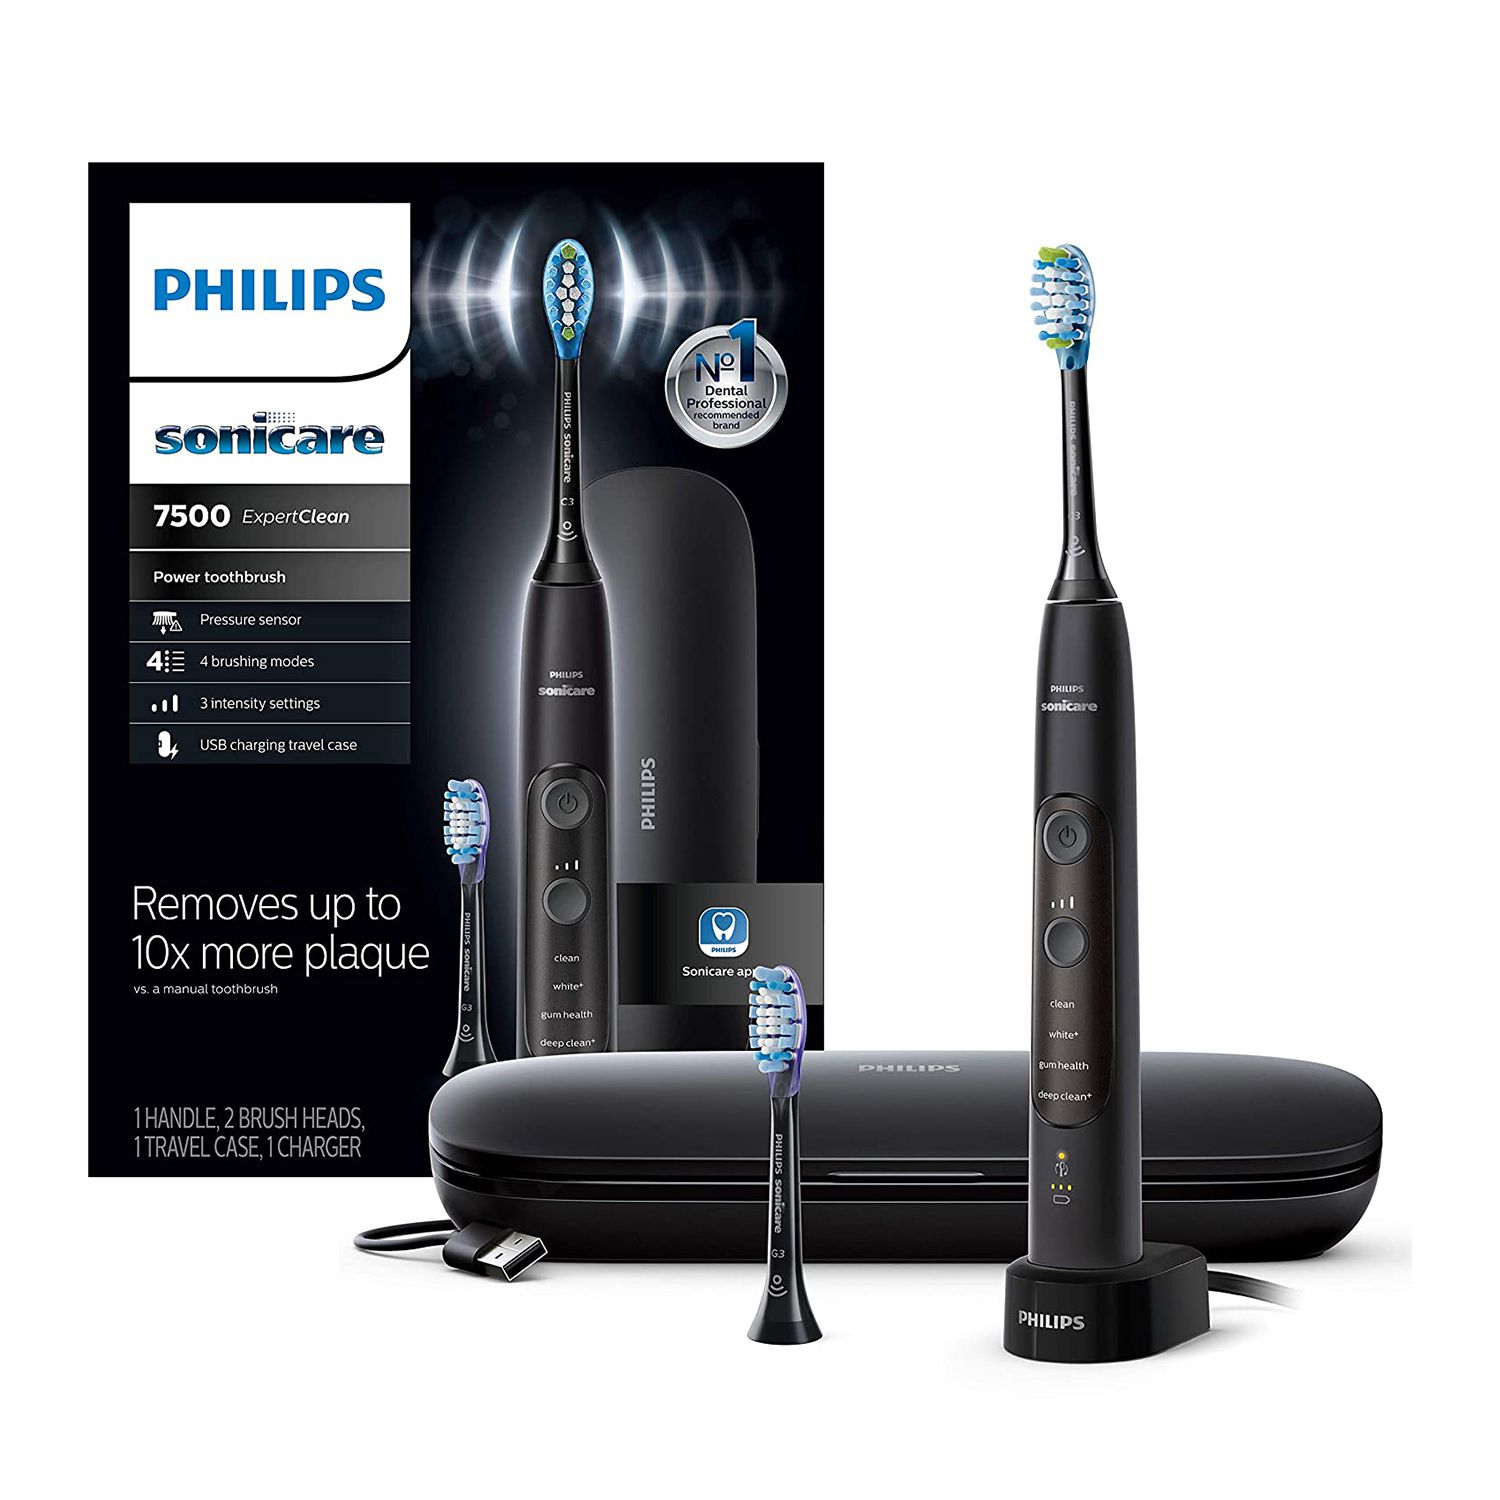 Philips Sonicare 7500 ExpertClean Toothbrush